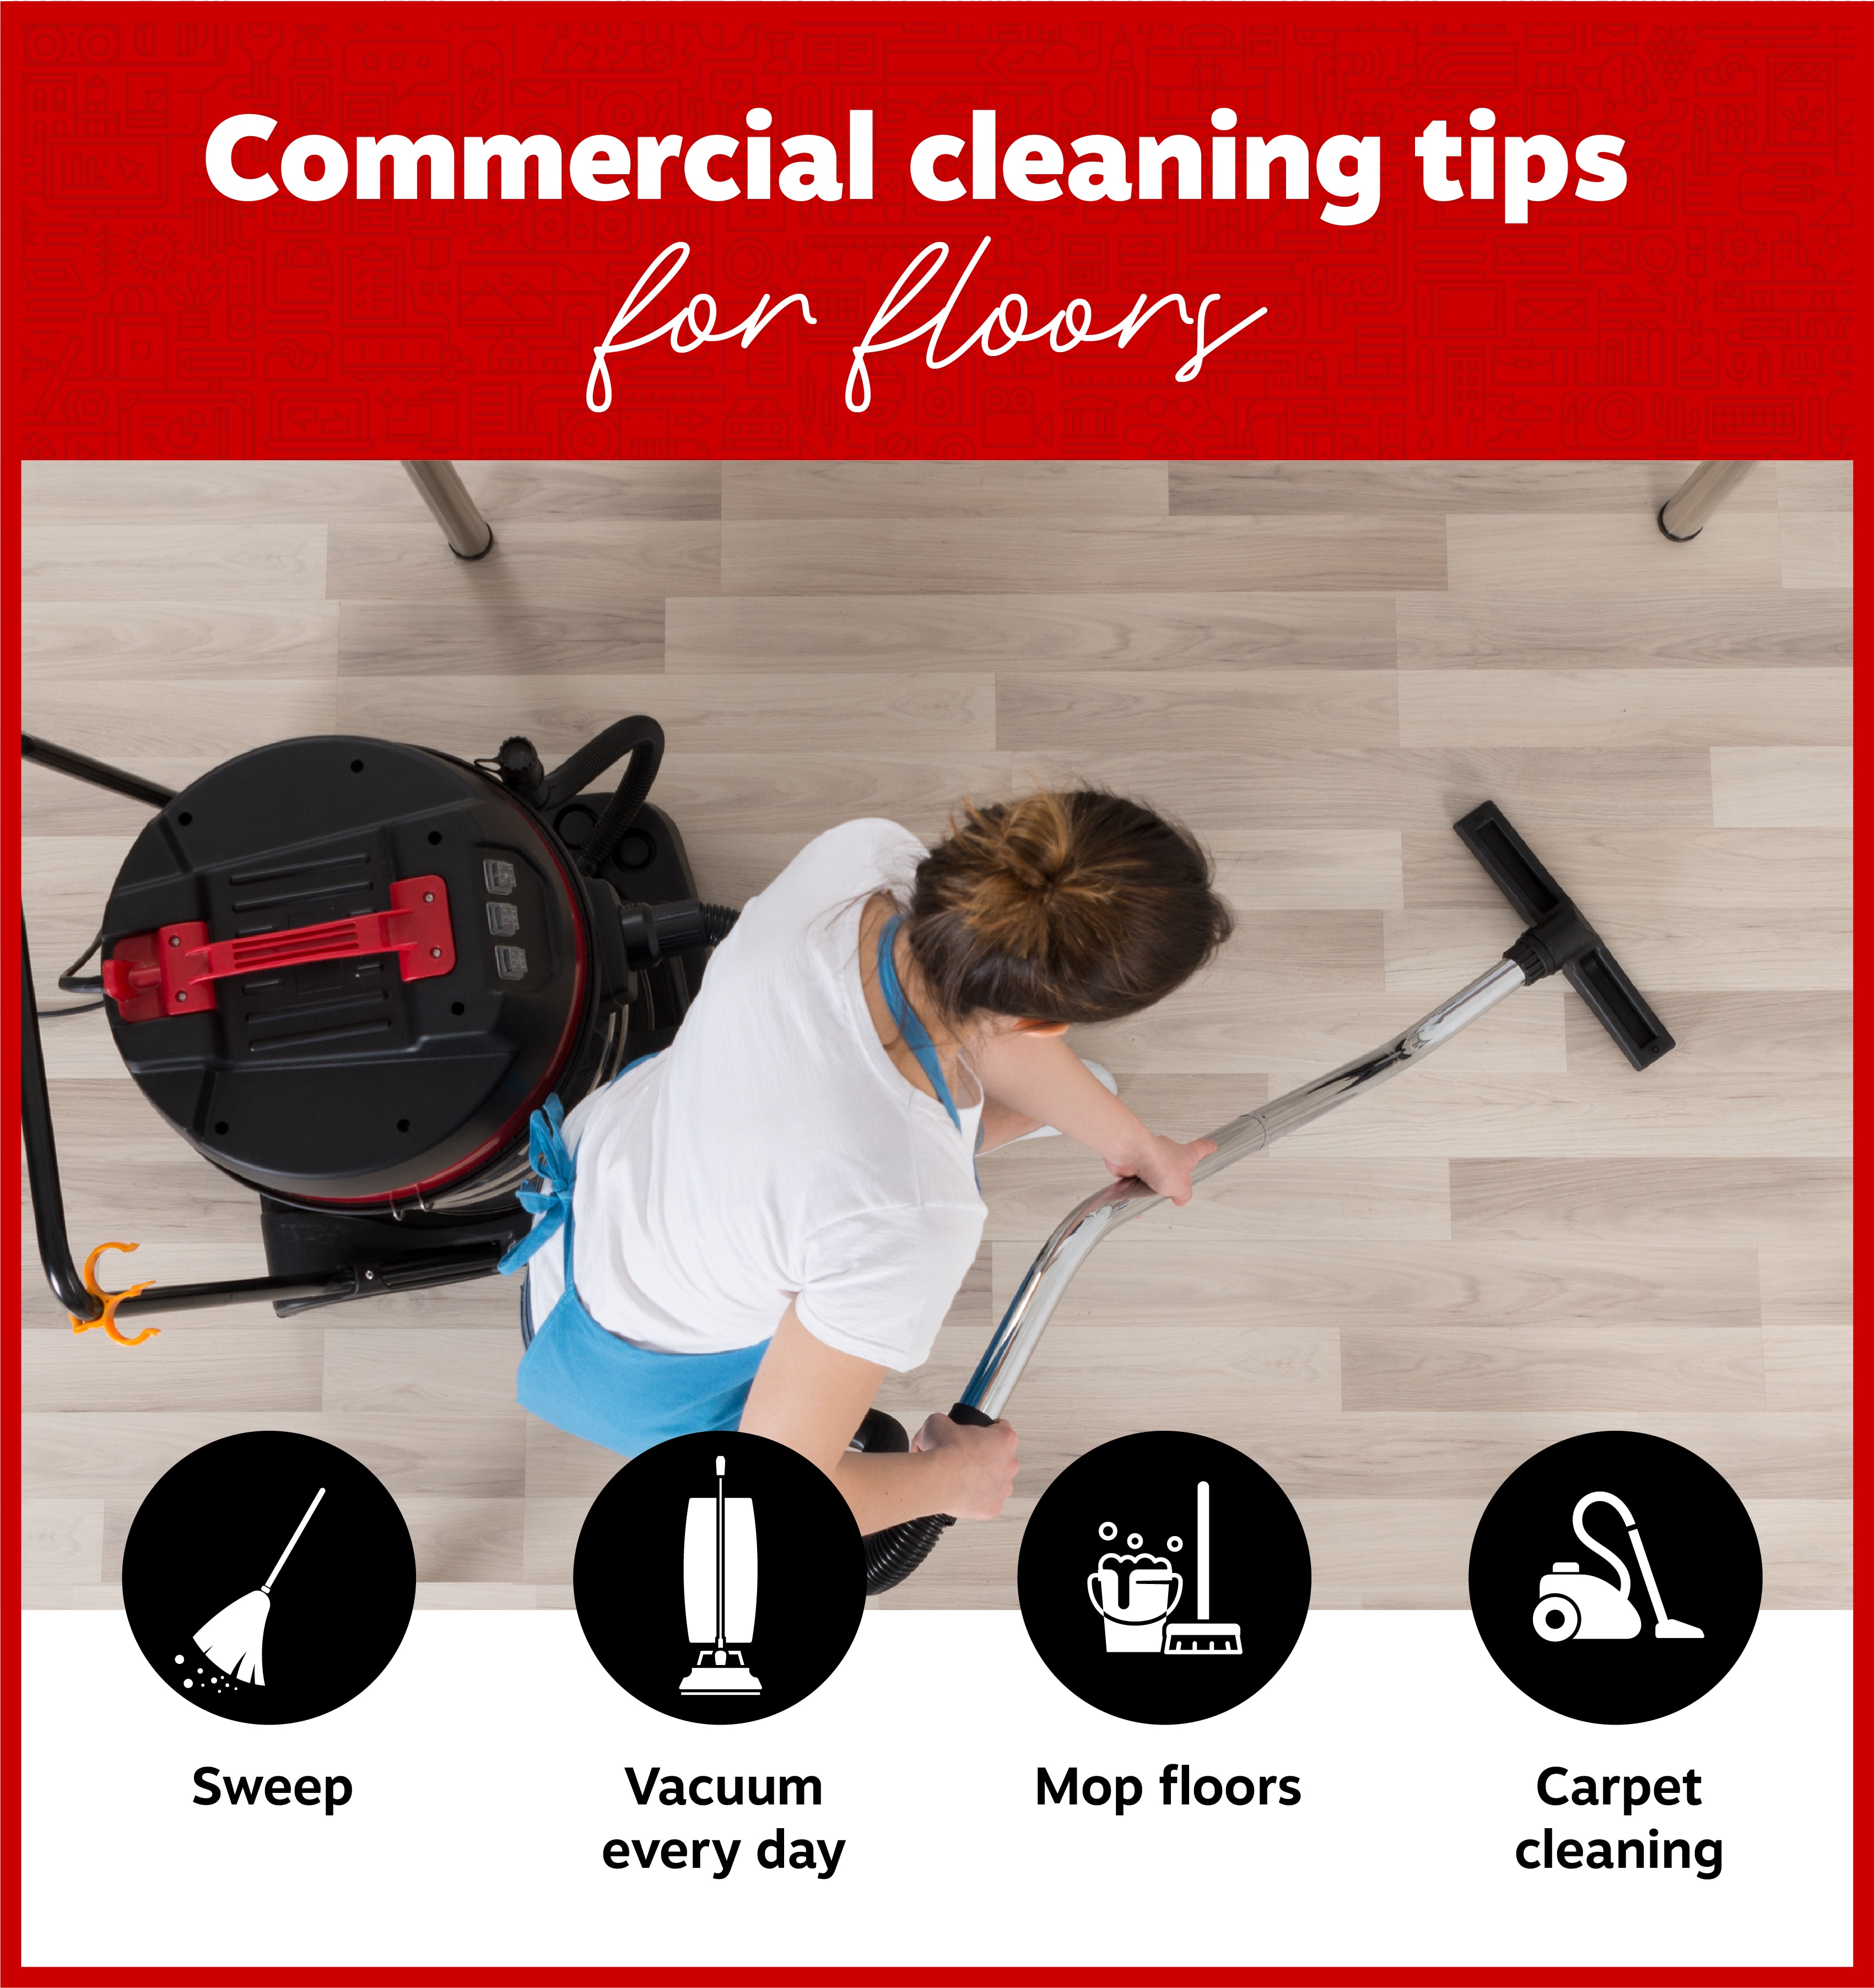 11 Professional Cleaning Tips and Tricks That Save Time